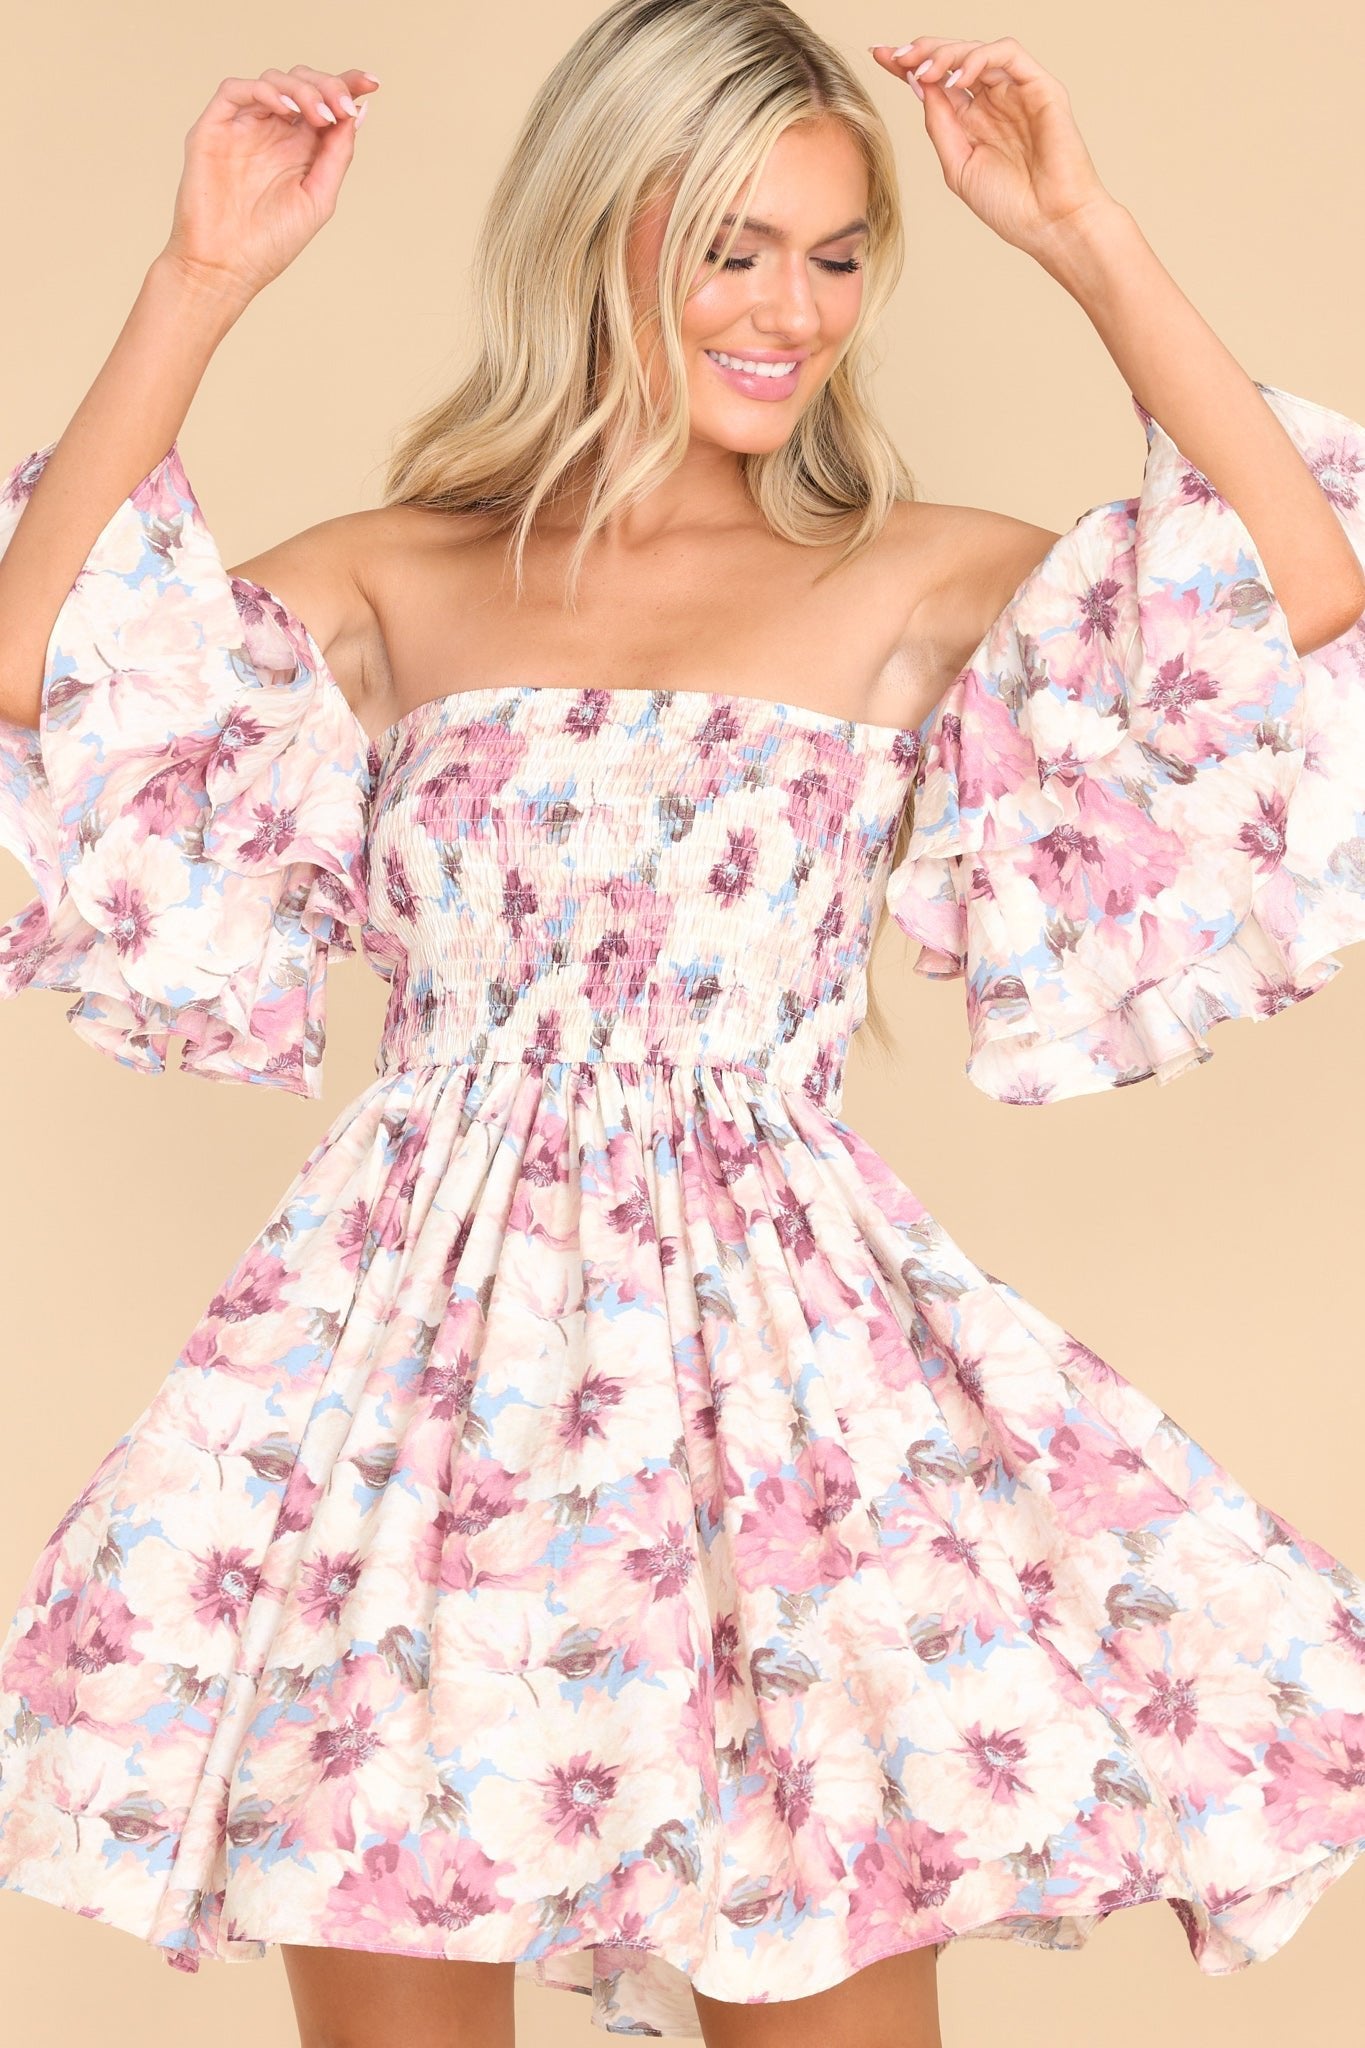 Romance In The Air Ivory Floral Dress - Red Dress